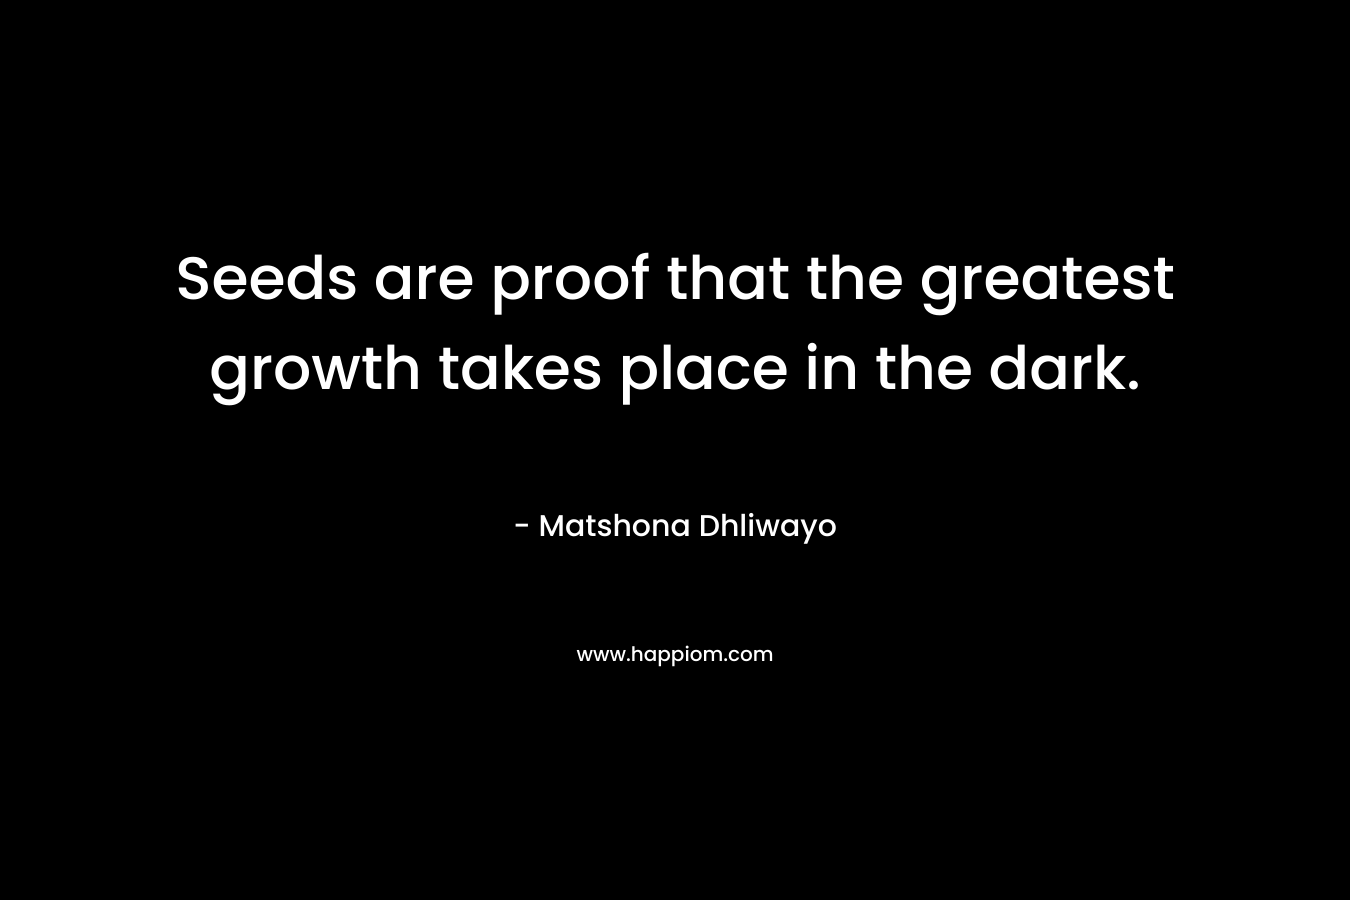 Seeds are proof that the greatest growth takes place in the dark.